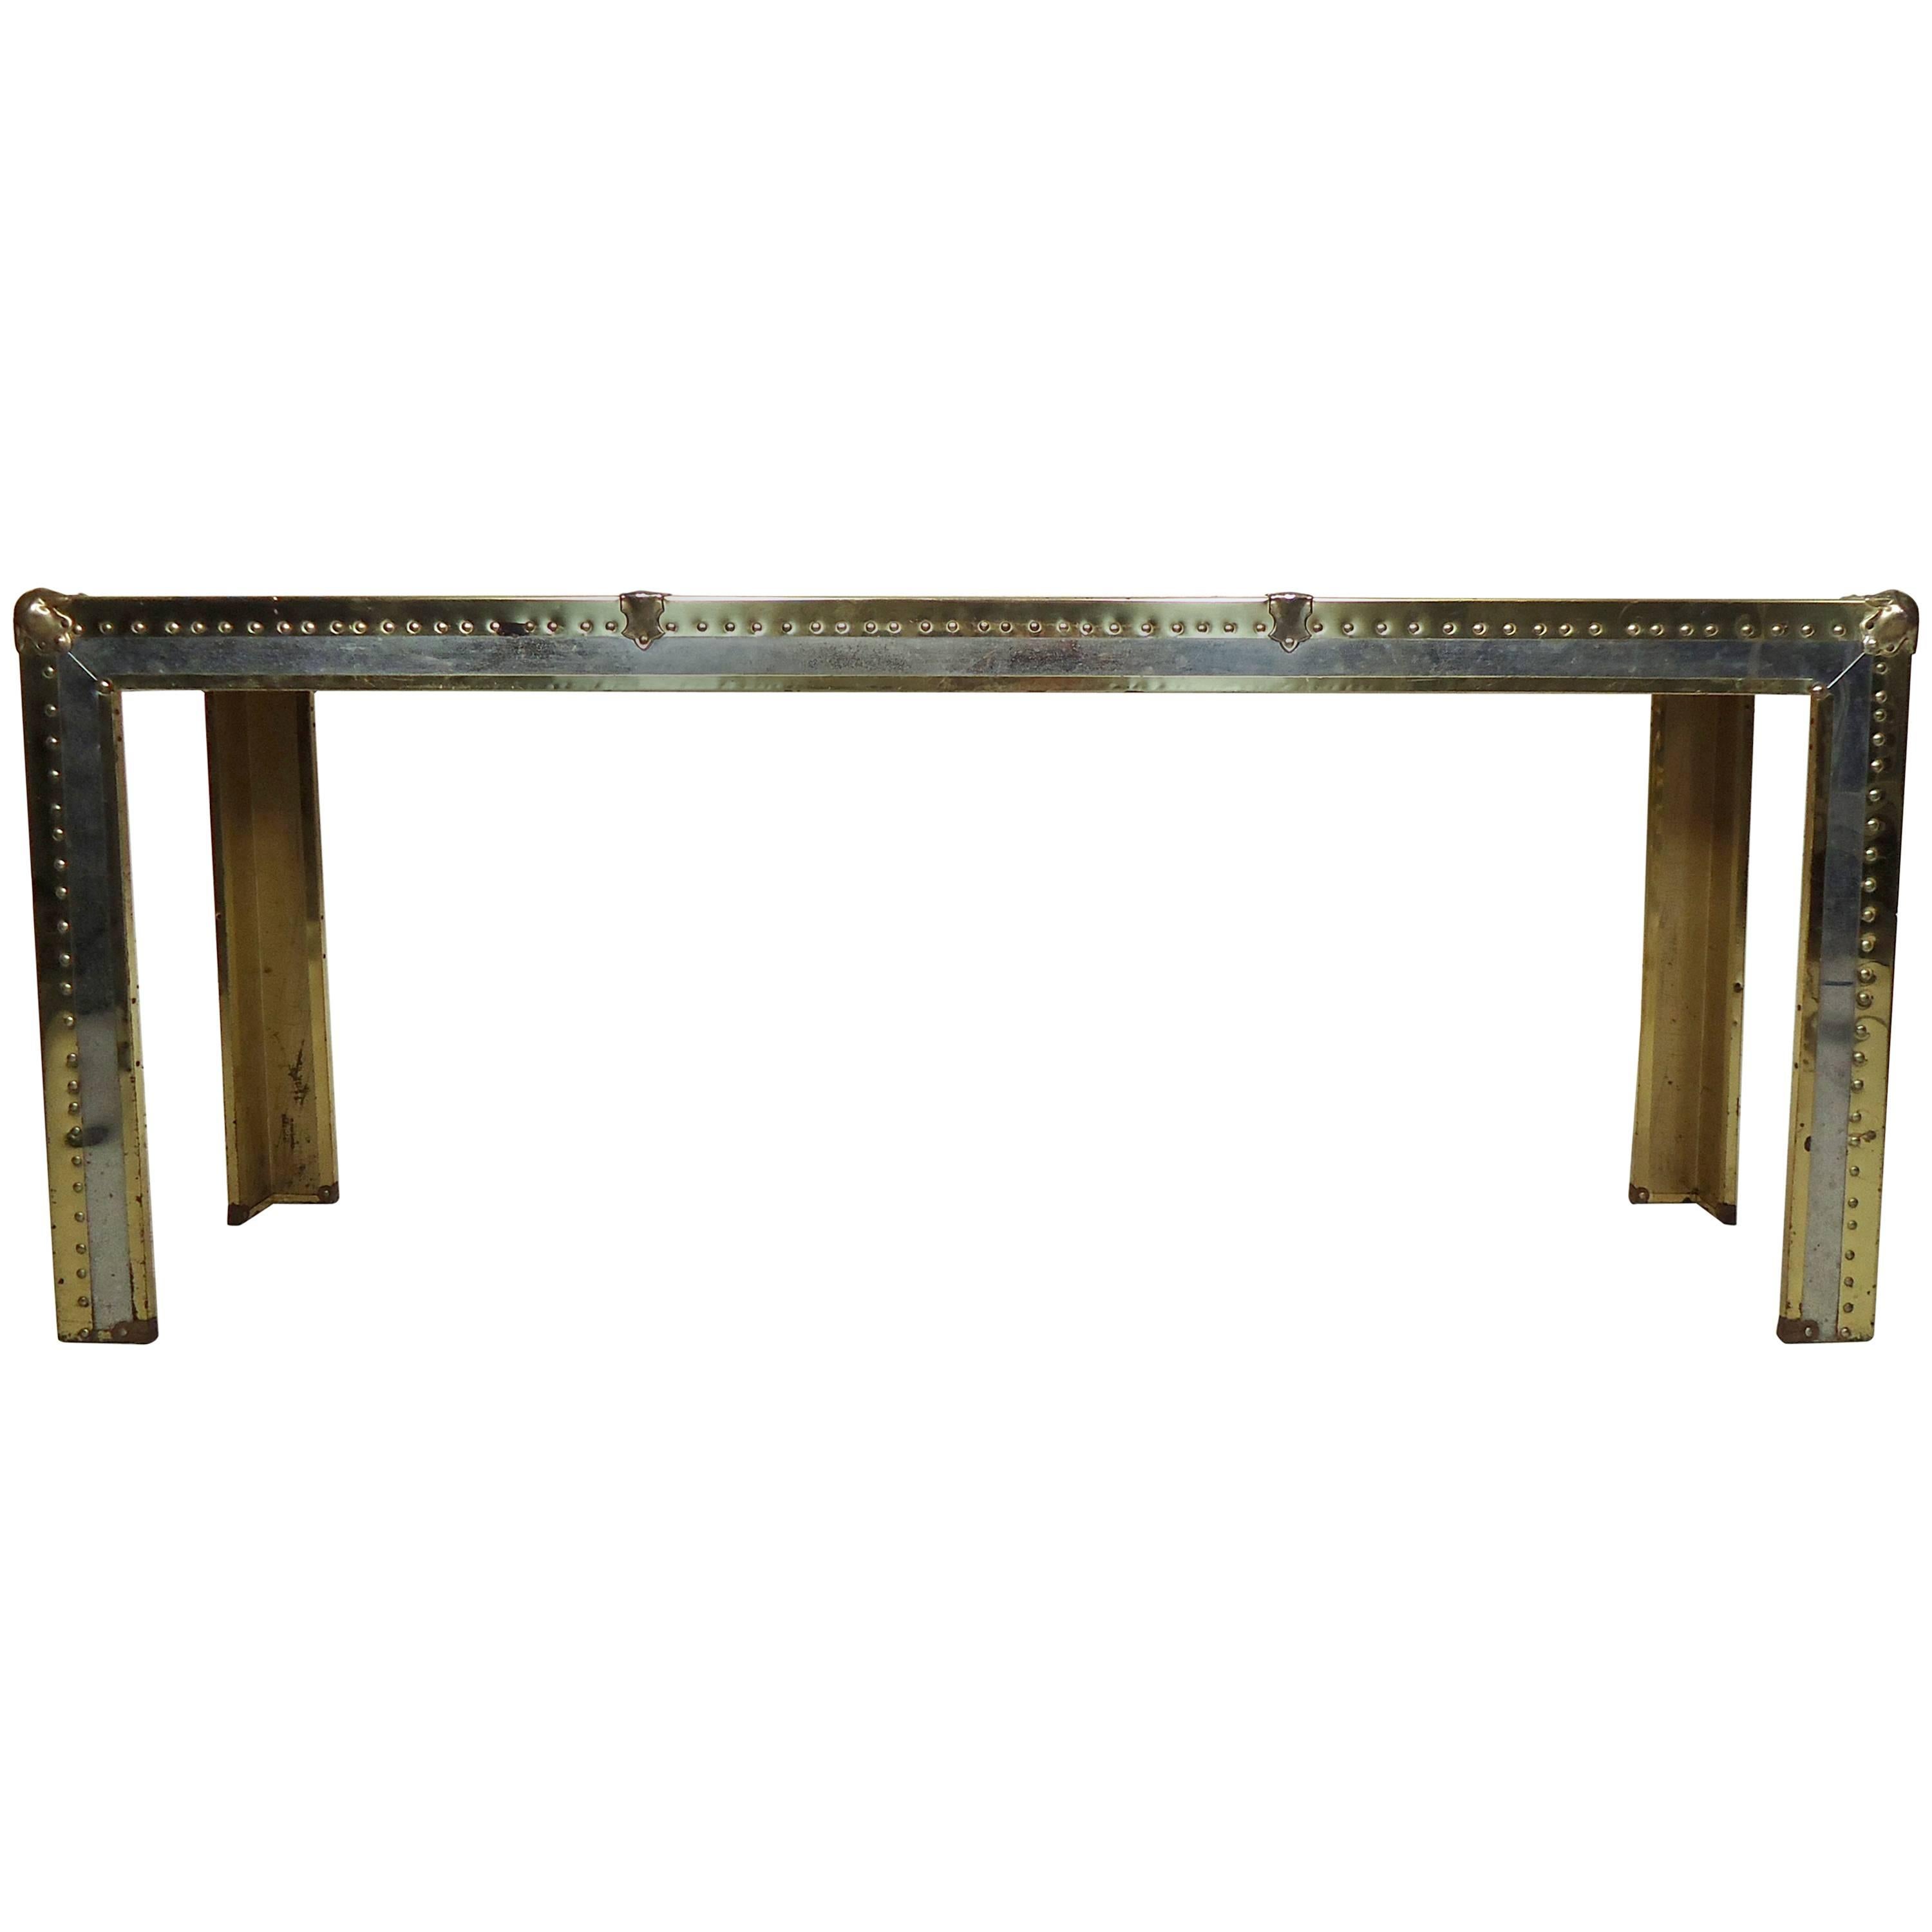 Vintage-modern console table featuring metal plating, chrome with brass accenting and exposed rivets.

Please confirm item location NY or NJ with dealer.